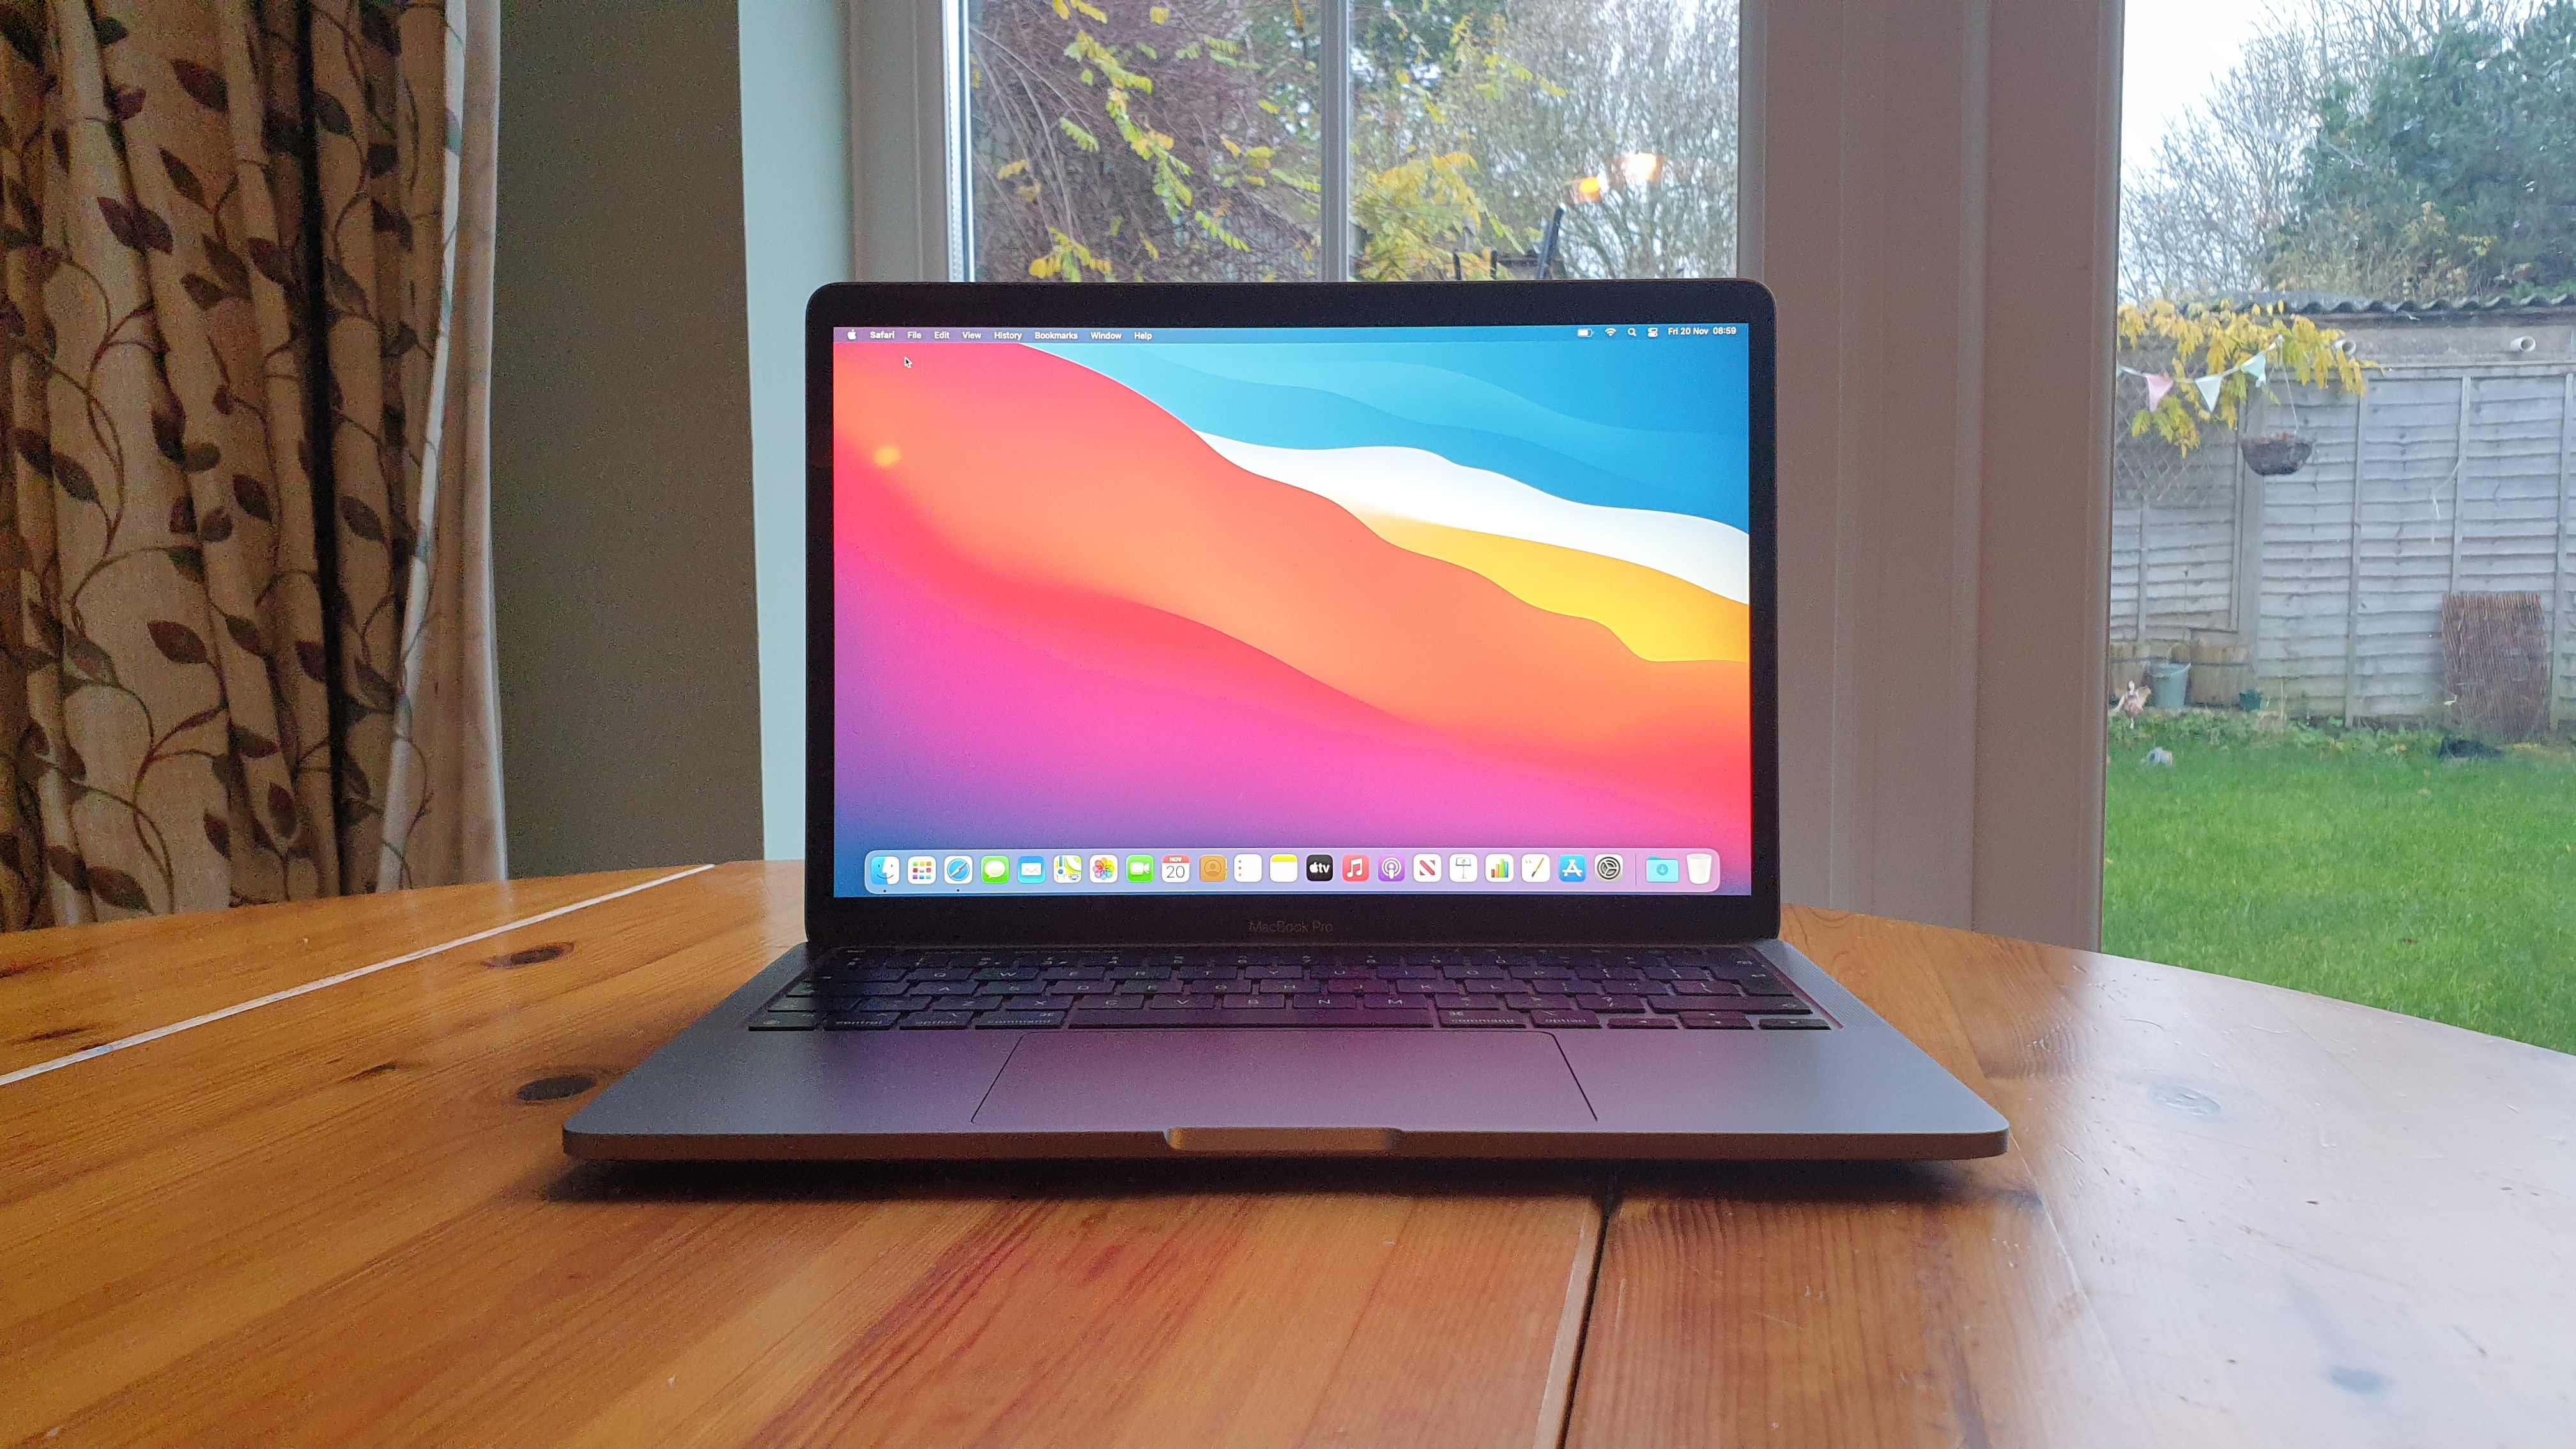 MacBook Pro 13-inch (M1, 2020) on a wooden table with a garden in the background